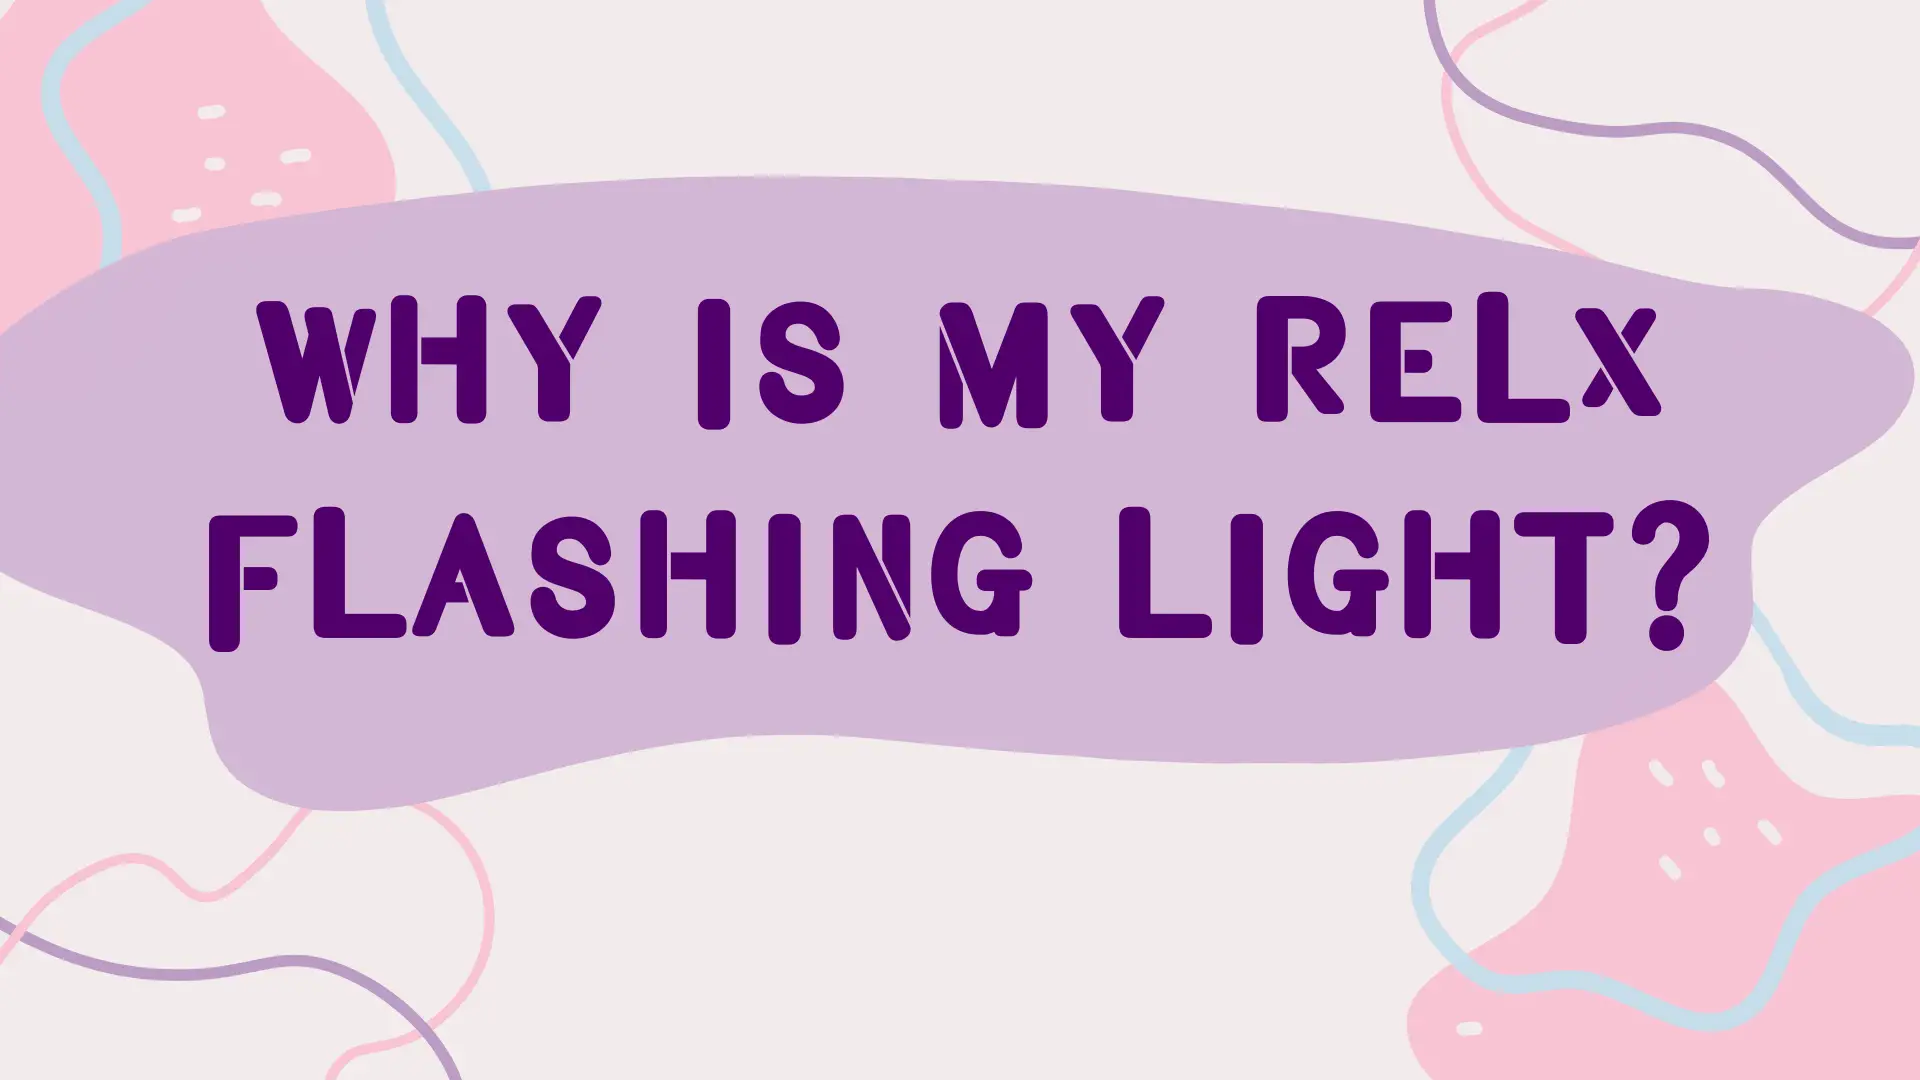 What Is The RELX Flashing Light：Why Is My RELX Flashing Light?